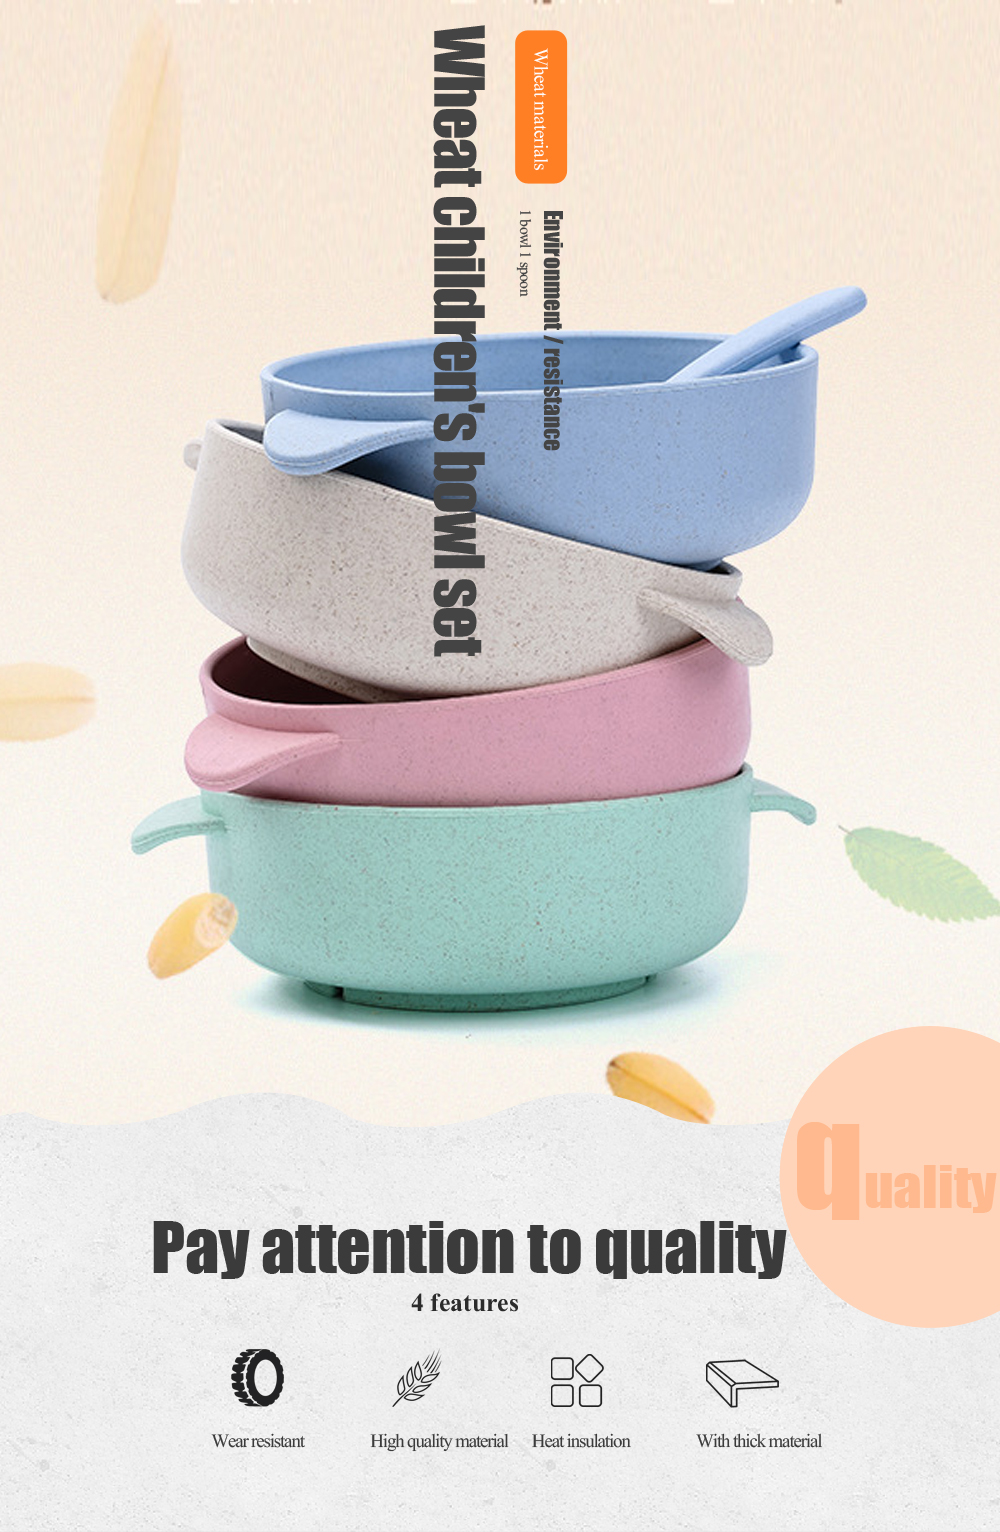 Children Bowl and Spoon Environmental Protection Material of Wheat Straw